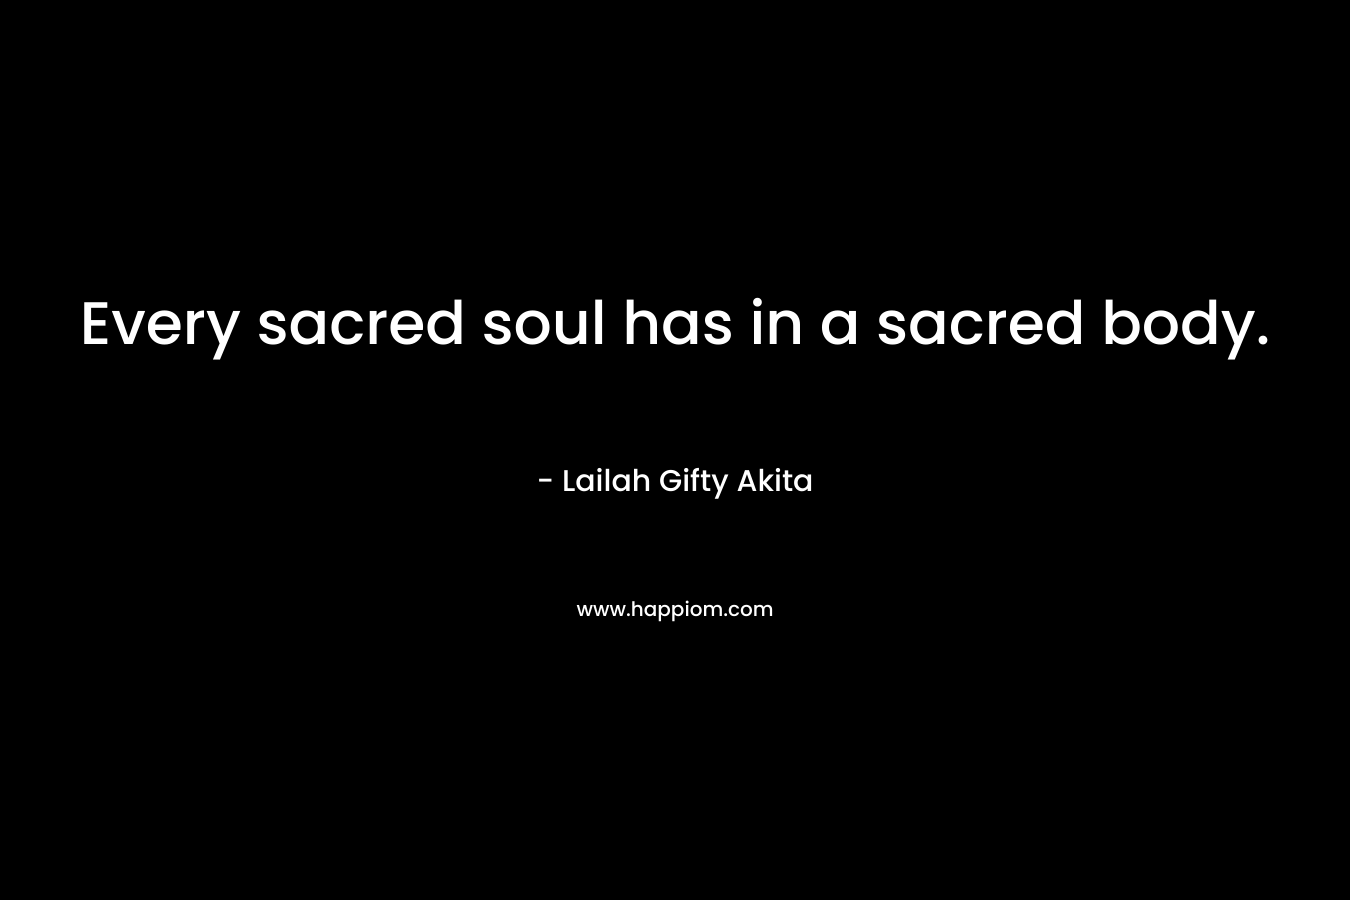 Every sacred soul has in a sacred body.